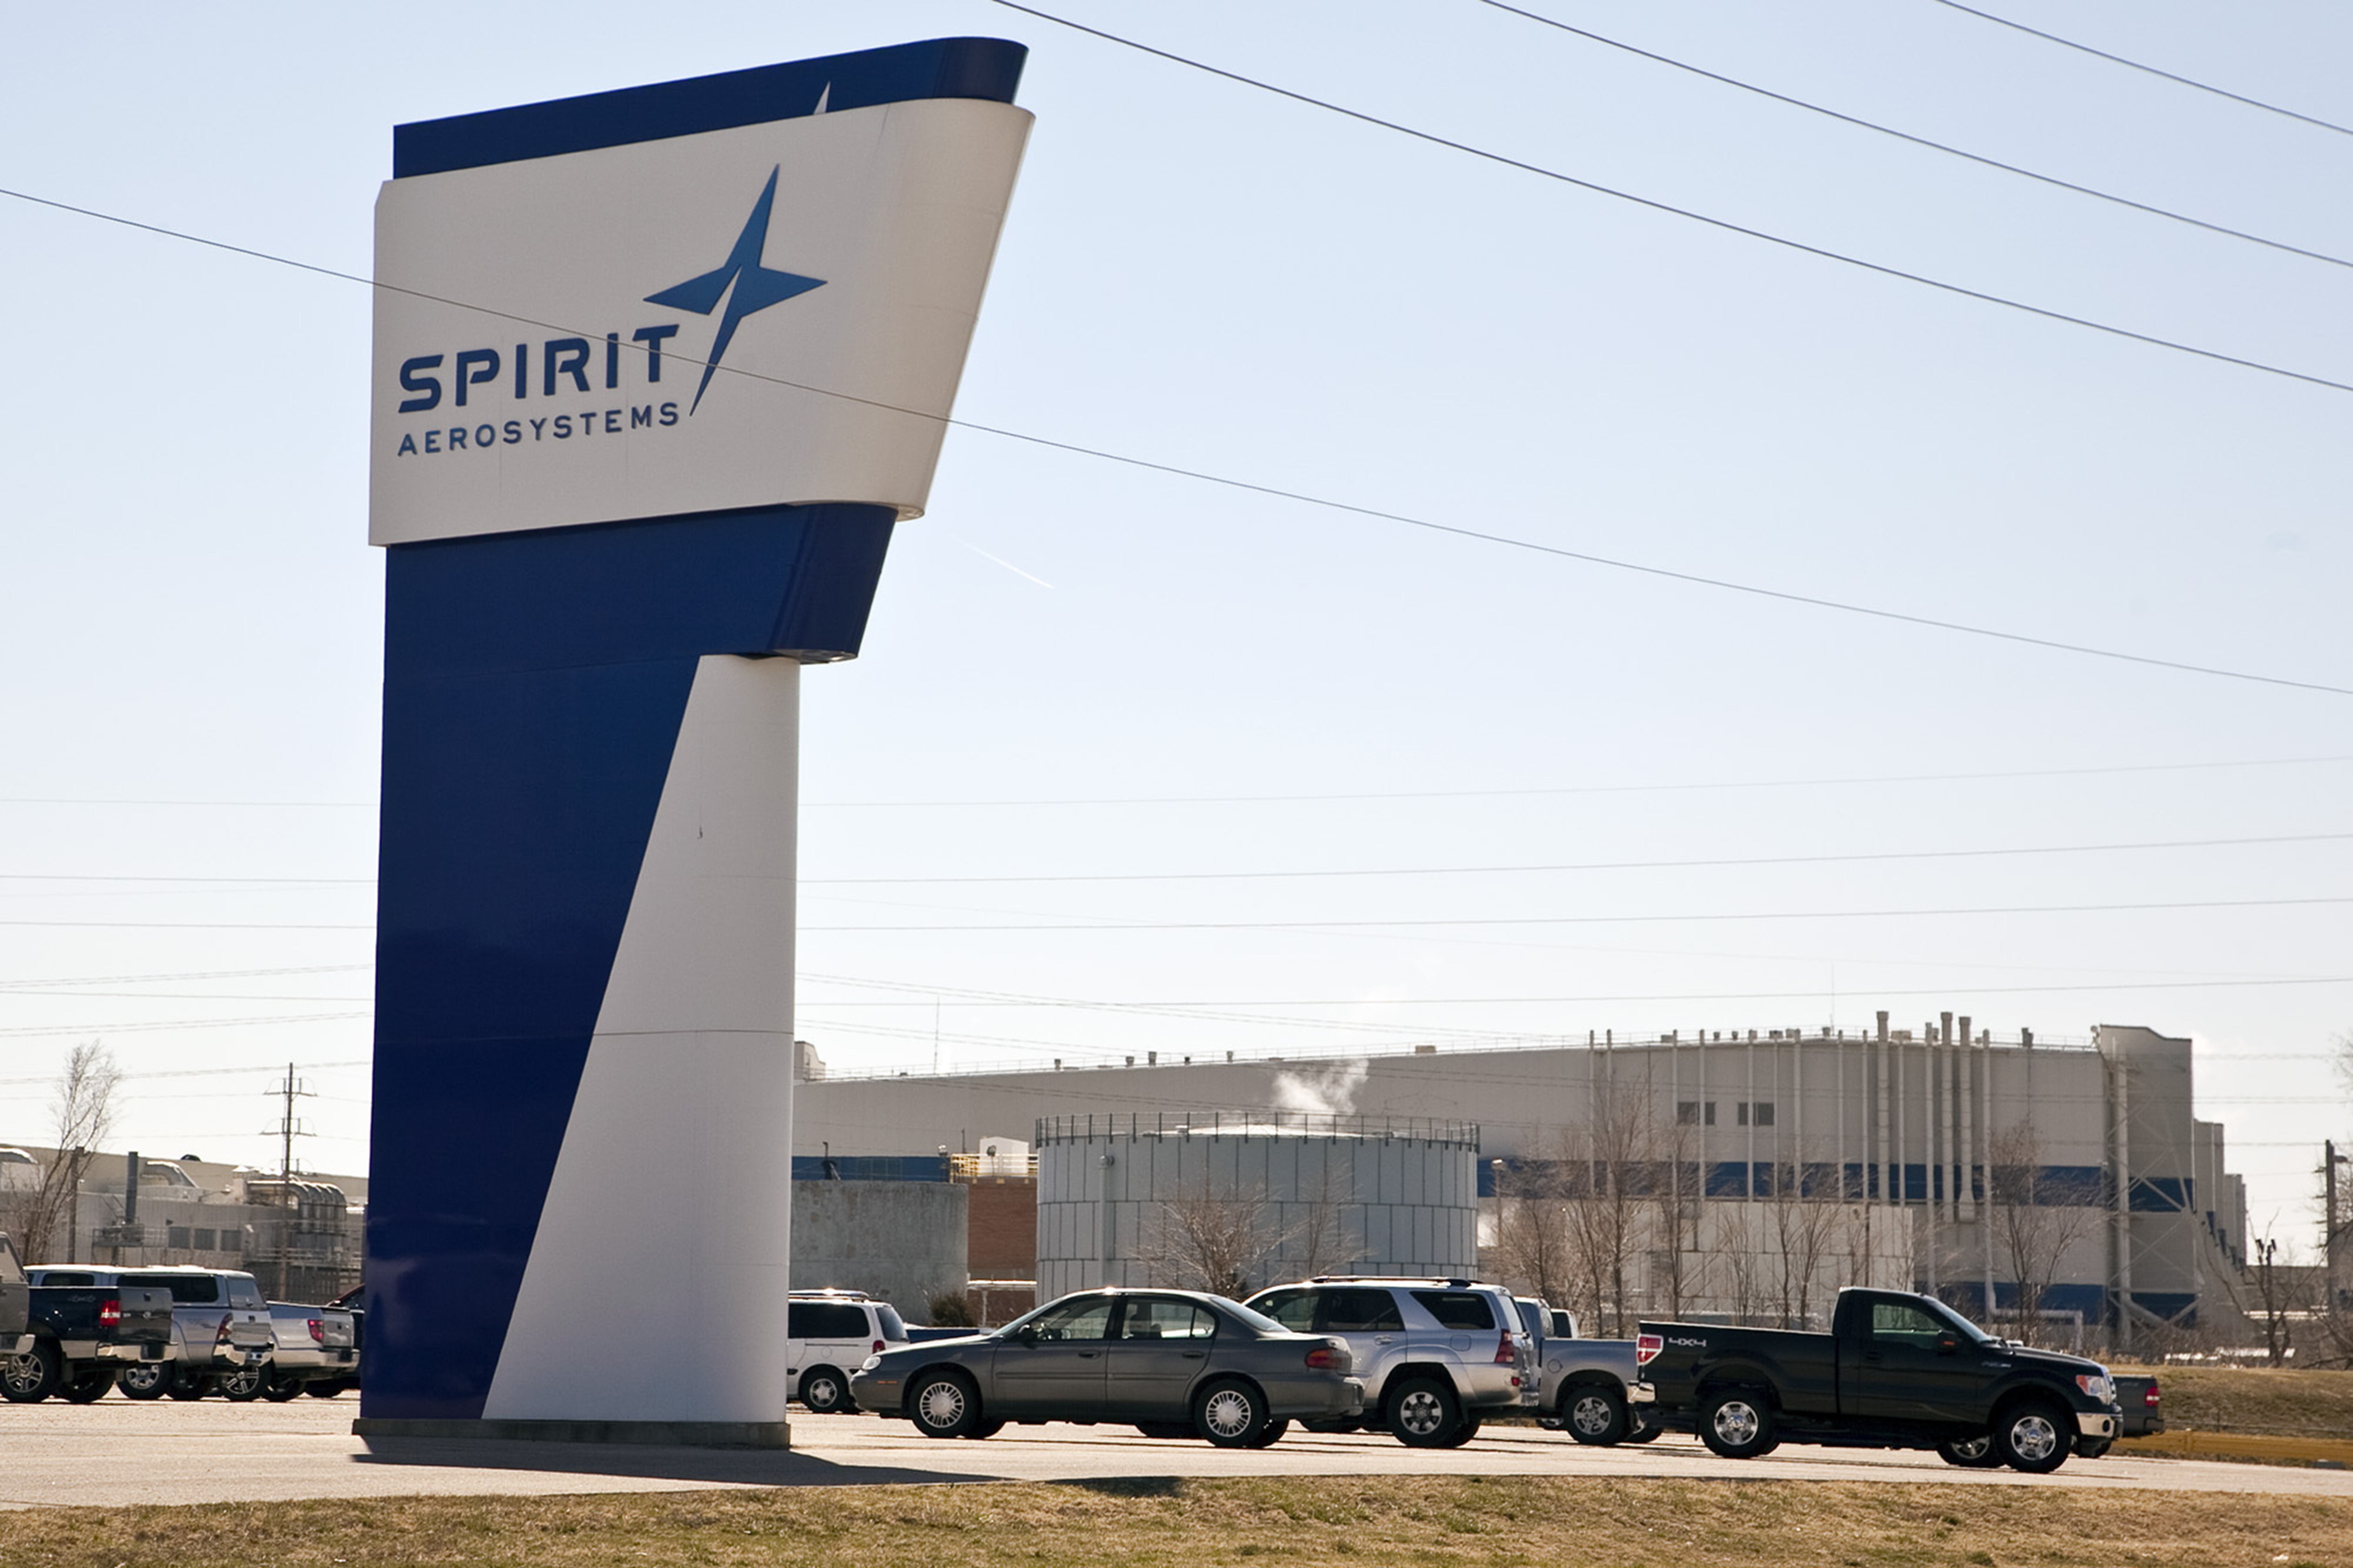 FILE - The Spirit AeroSystems sign is pictured, July 25, 2013, in Wichita, Kan. Boeing announced plans late Sunday, June 30, 2024, to acquire Spirit AeroSystems for $4.7 billion in an all-stock transaction for the manufacturing firm. (Mike Hutmacher/The Wichita Eagle via AP, File)